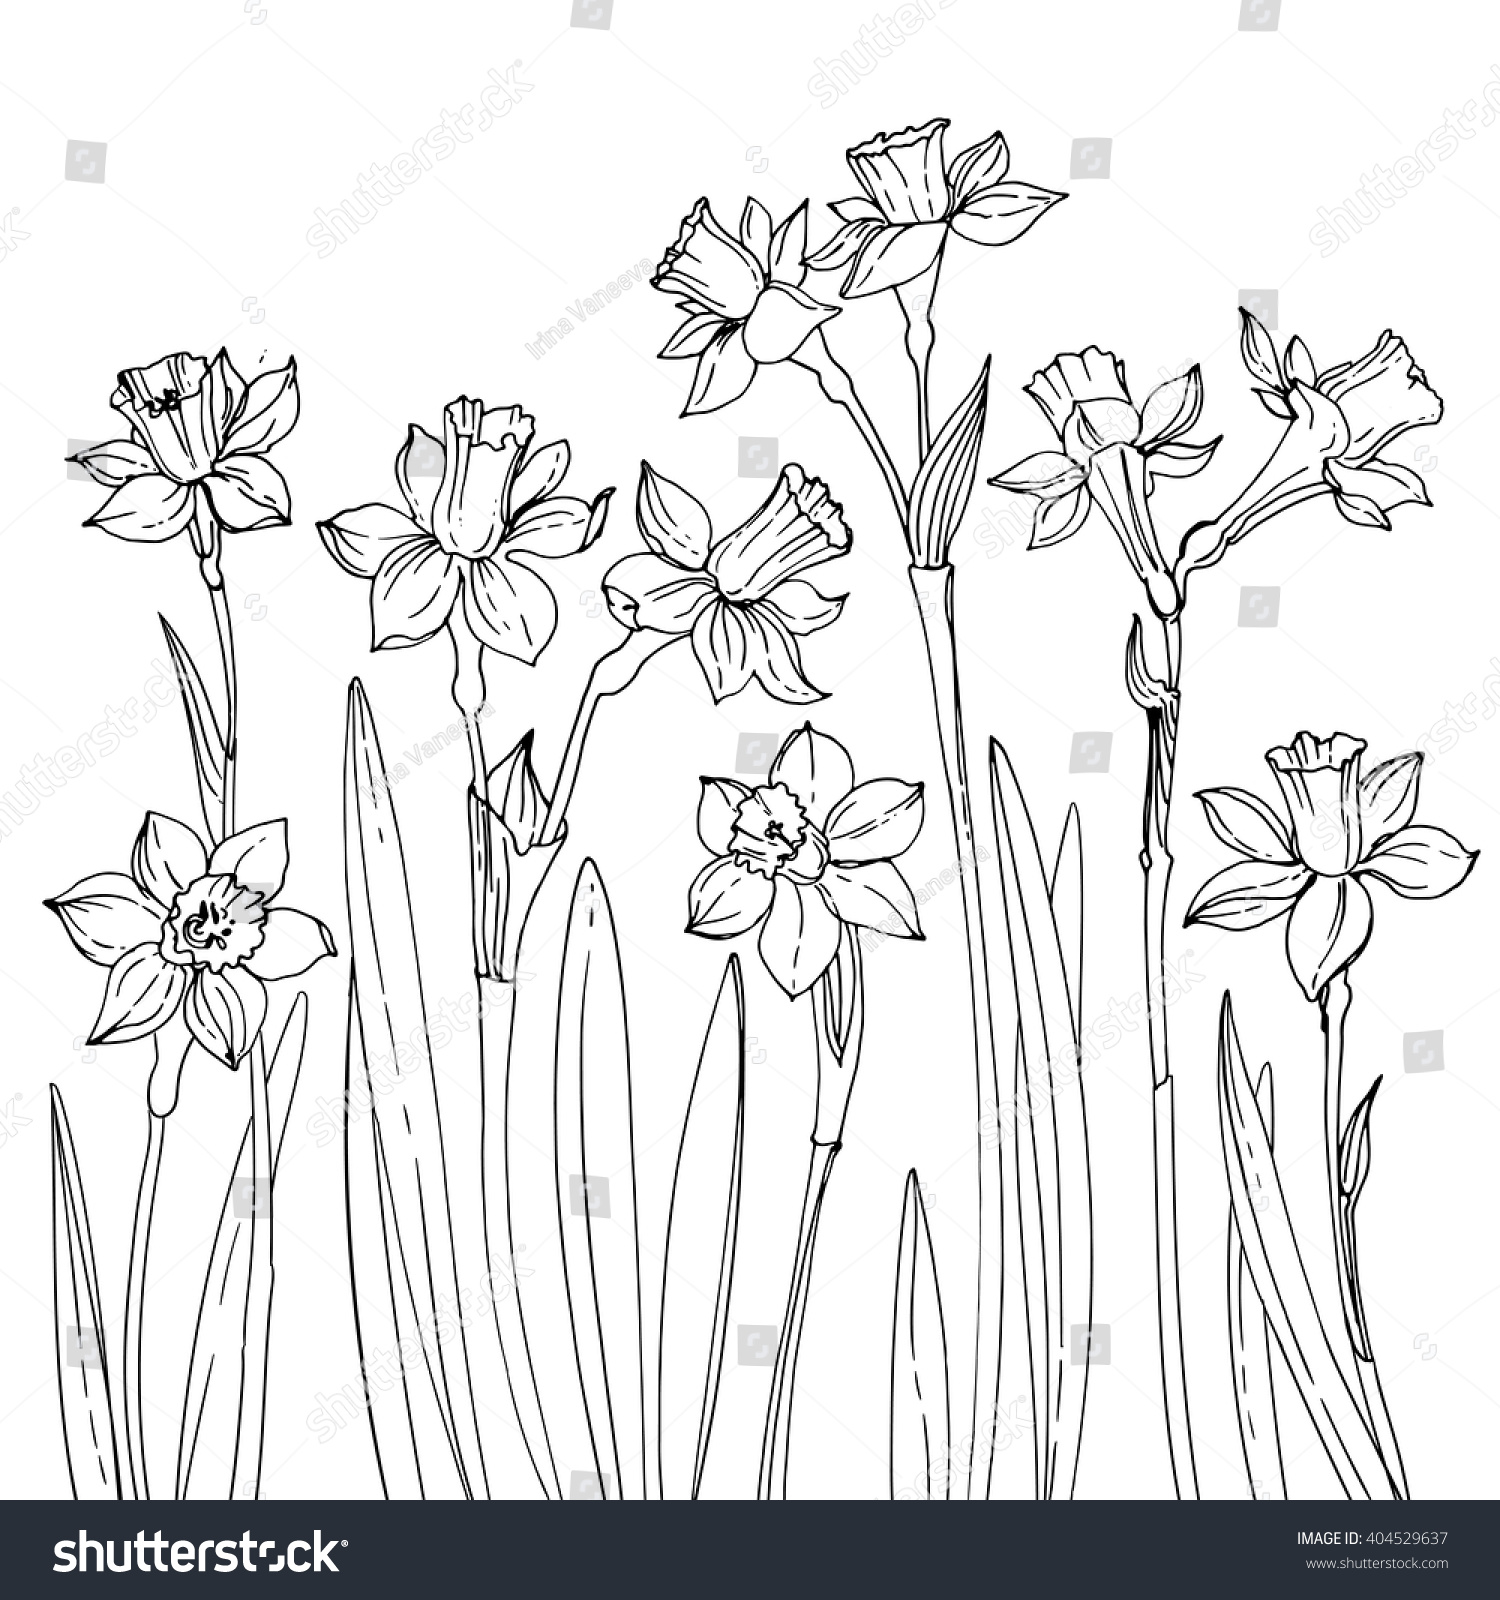 Set Vector Drawings Flowers Daffodils Line Stock Vector 404529637 ...